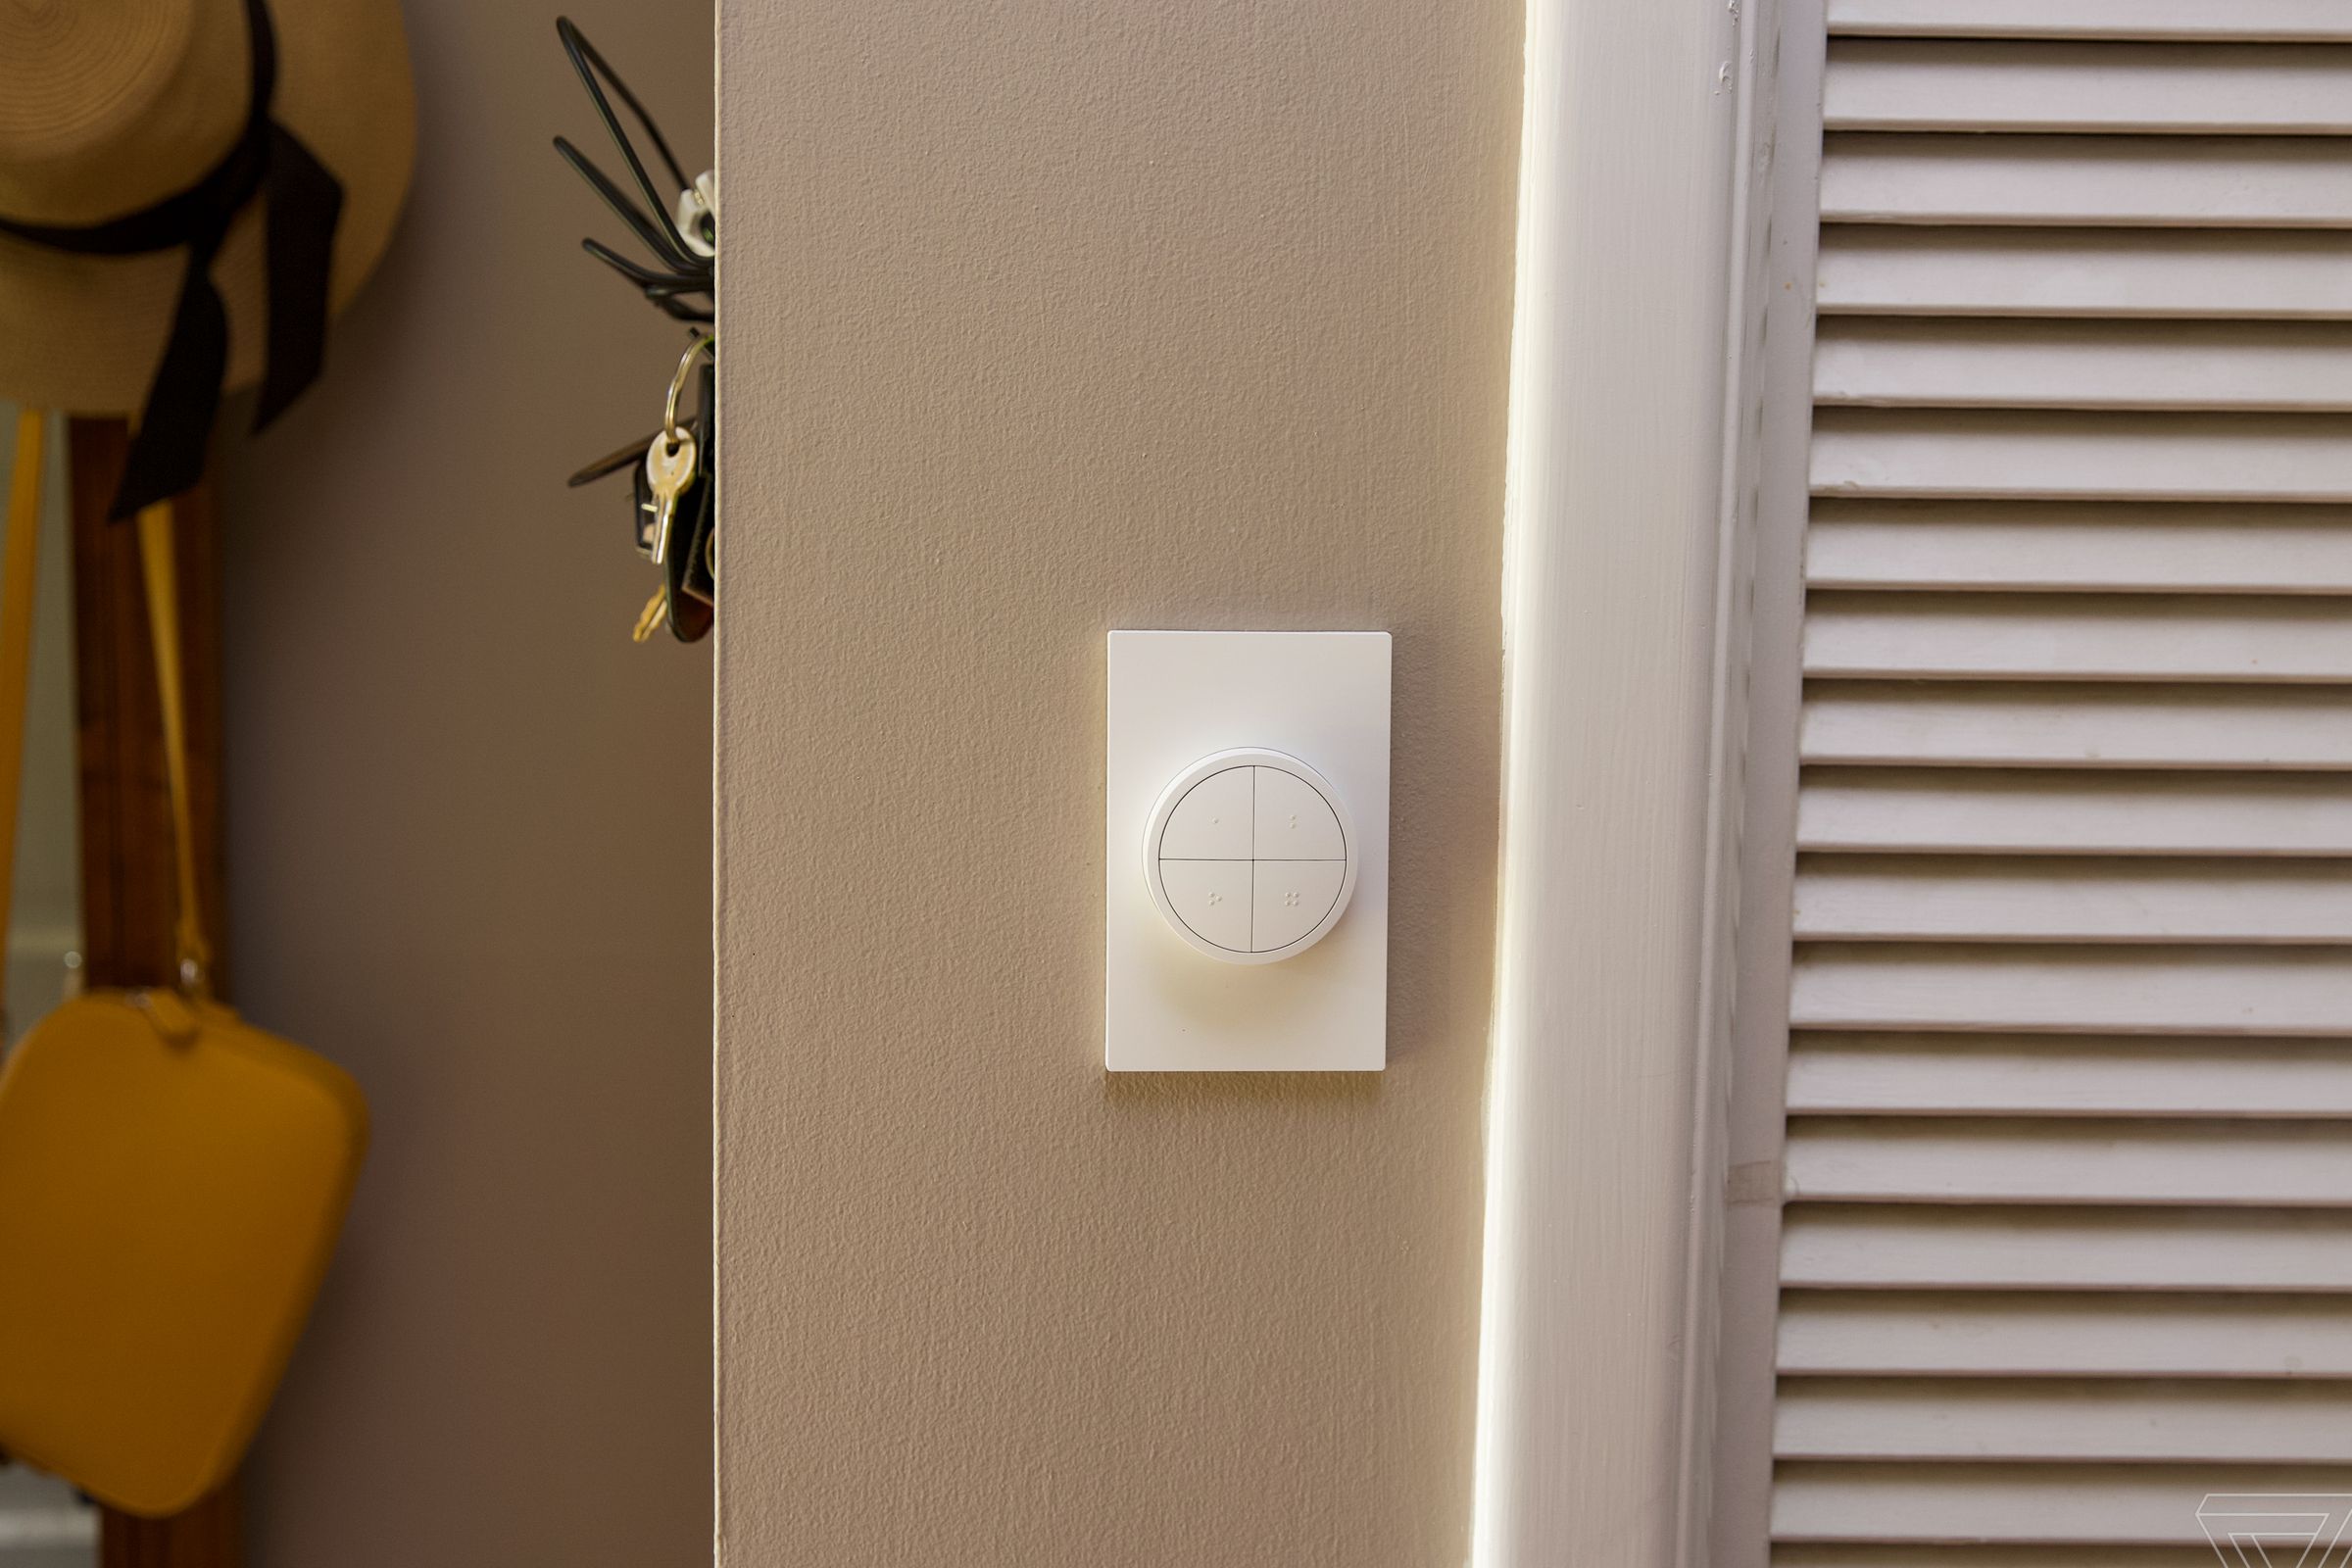 The Hue Tap Dial Switch makes a great whole home lighting controller. As long as you have all Hue lights.